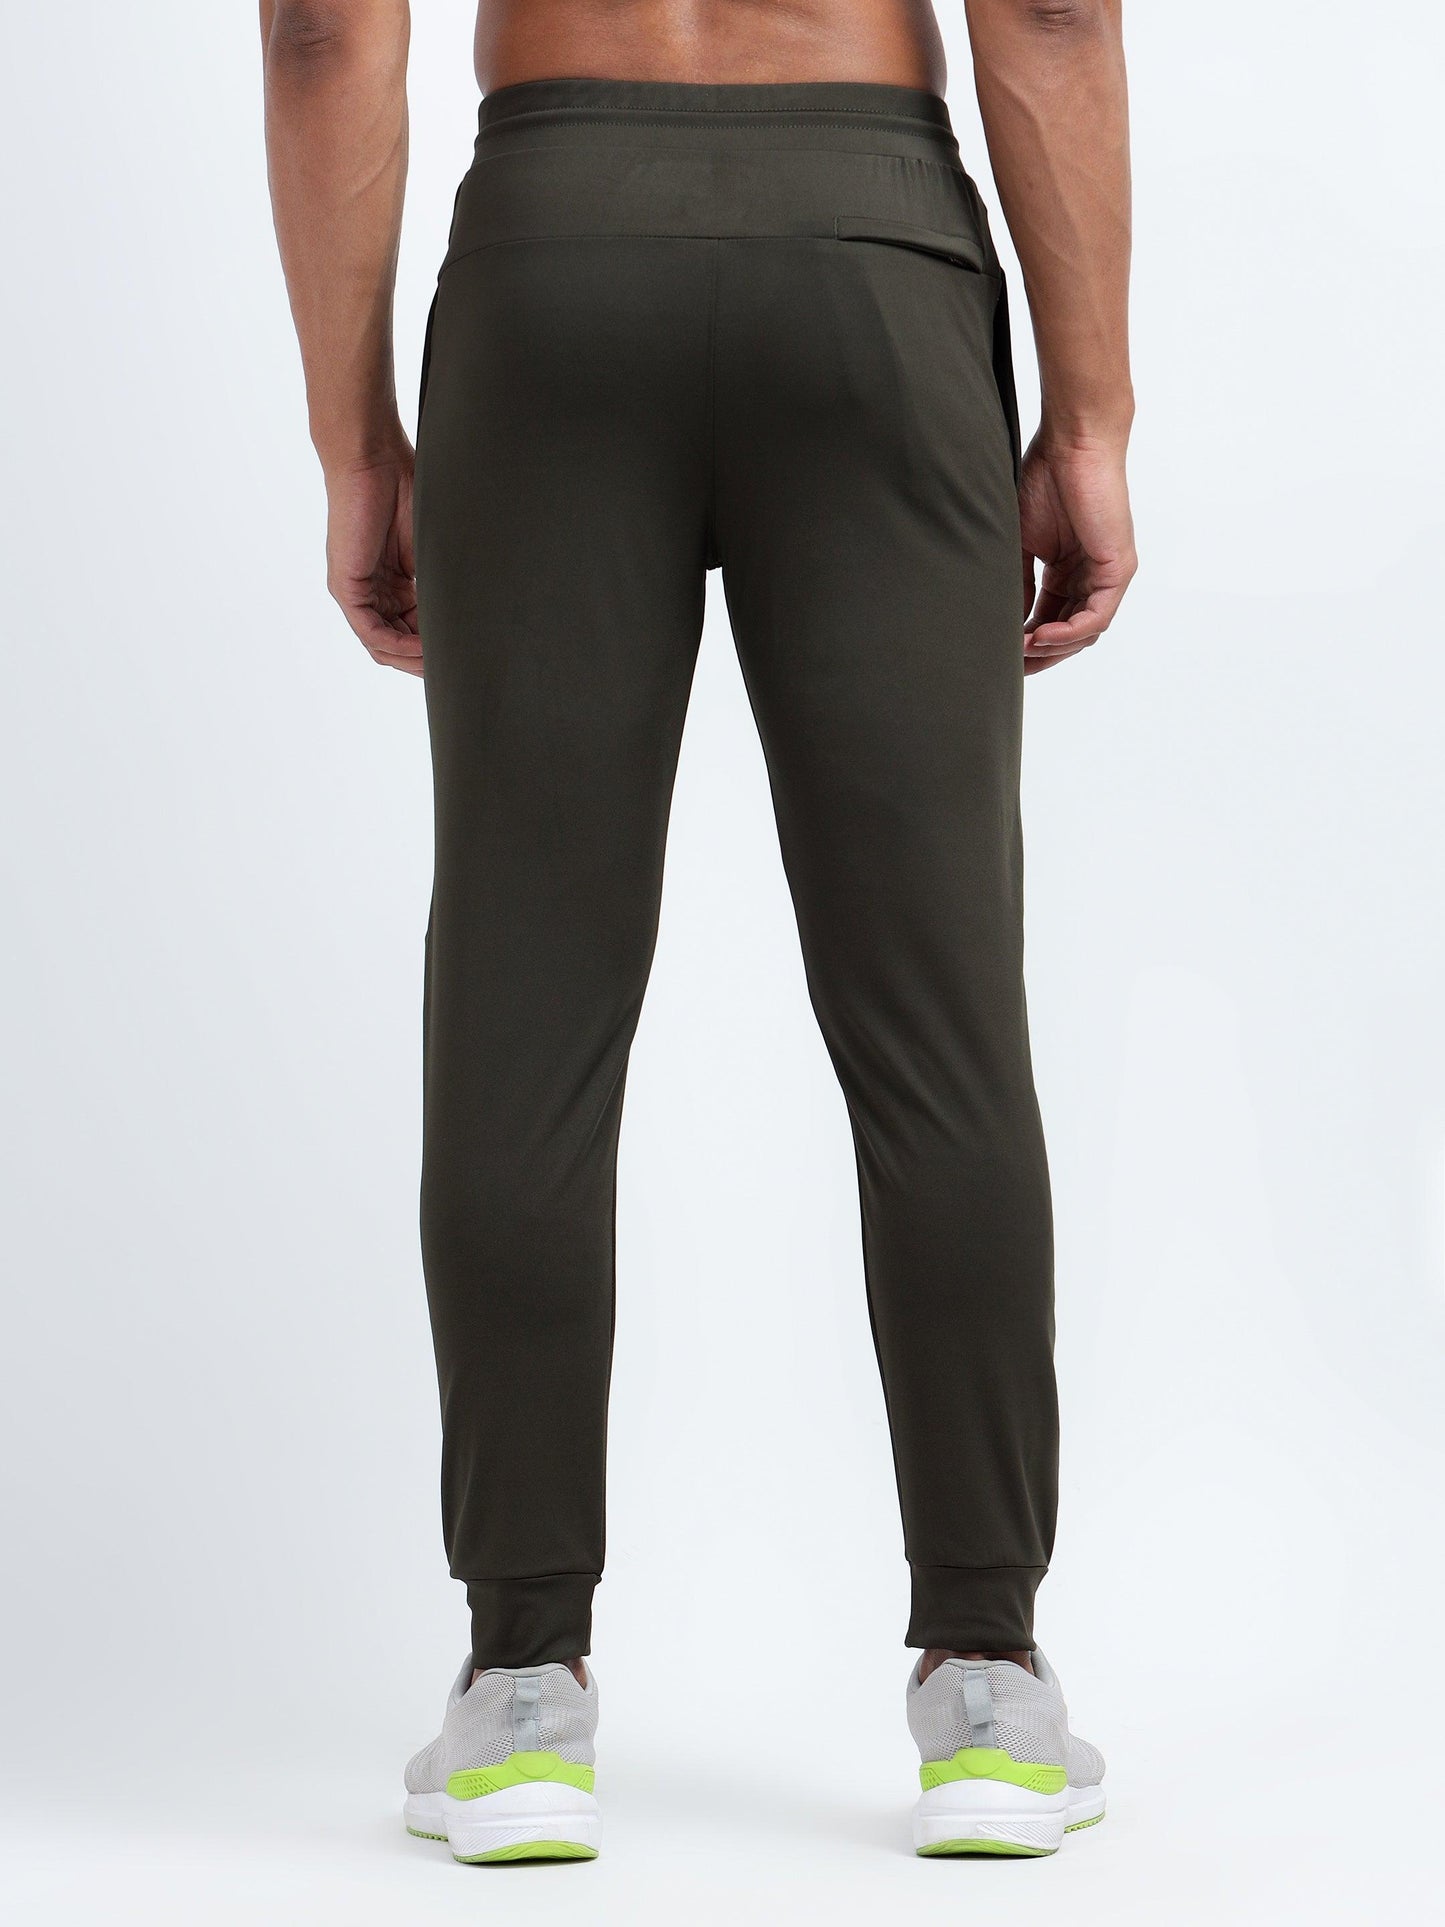 Denmonk: Elevate your look with these Power joggers sharp core olive joggers for mens.